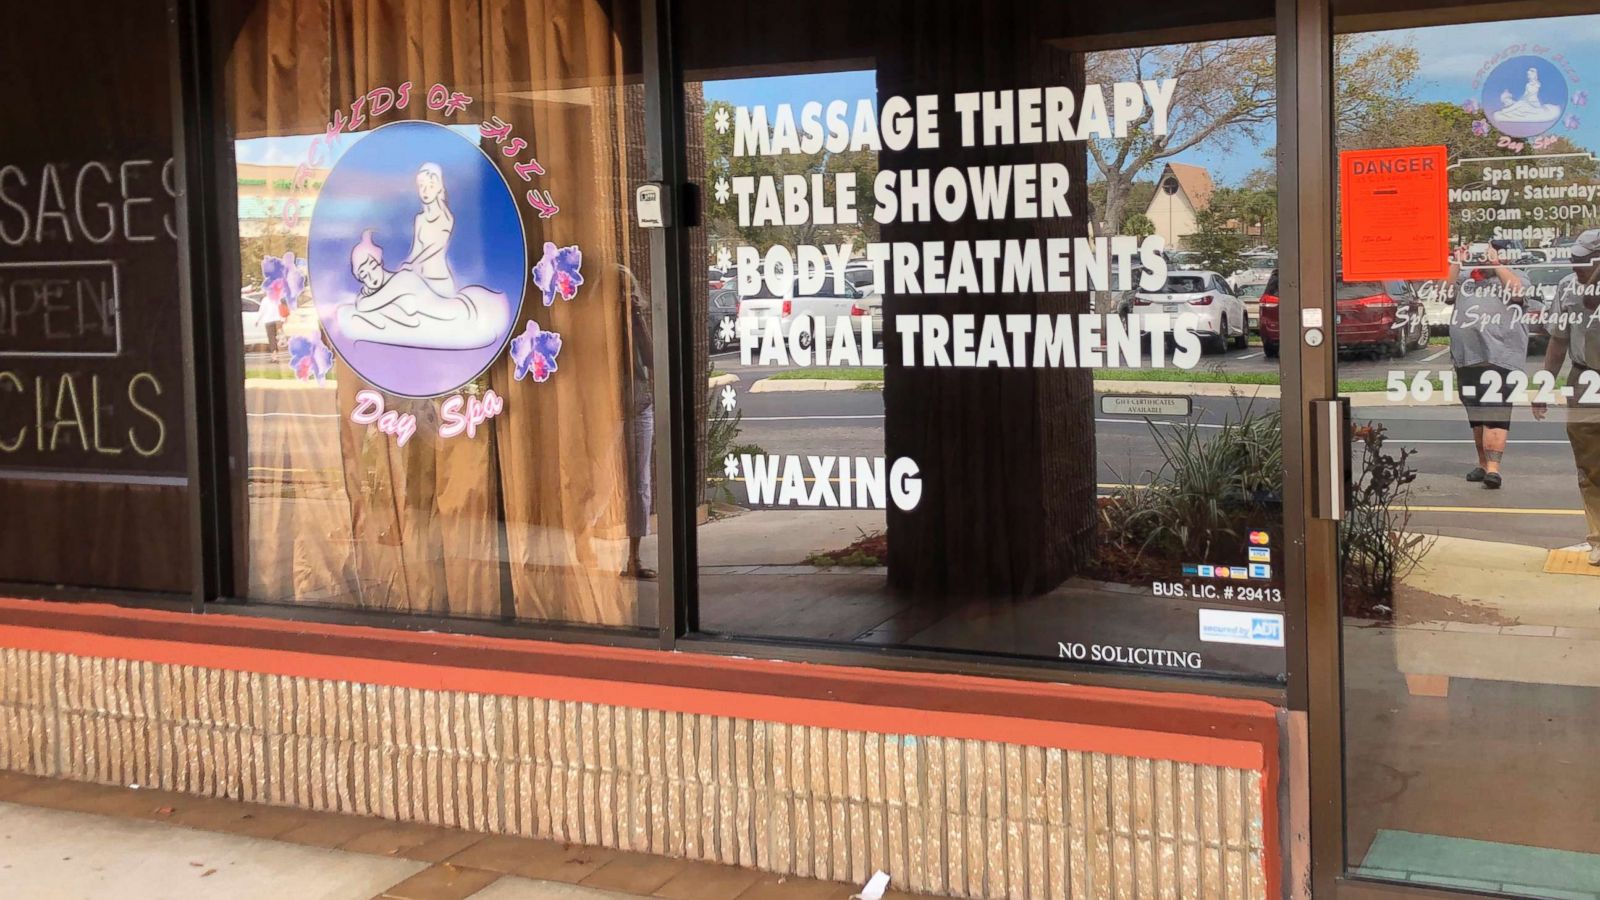 doug greenfield recommends massage parlor erotic stories pic